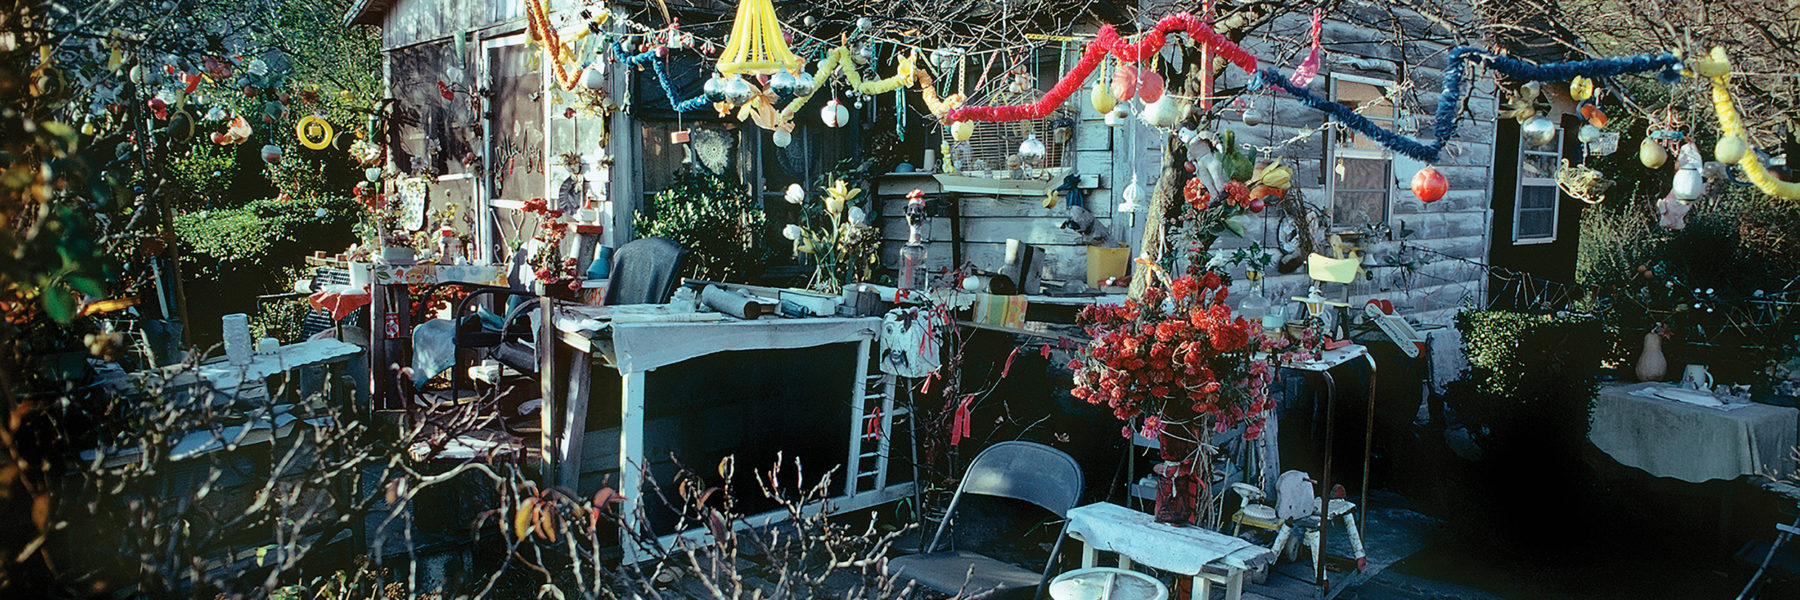 A house stands at the center of the photograph, a bare tree in the courtyard in front of the house. The tree branches are decorated with a myriad of colorful ornaments and baubles. The courtyard is full of folding chairs and tables covered with an assortment of projects and flower arrangements.